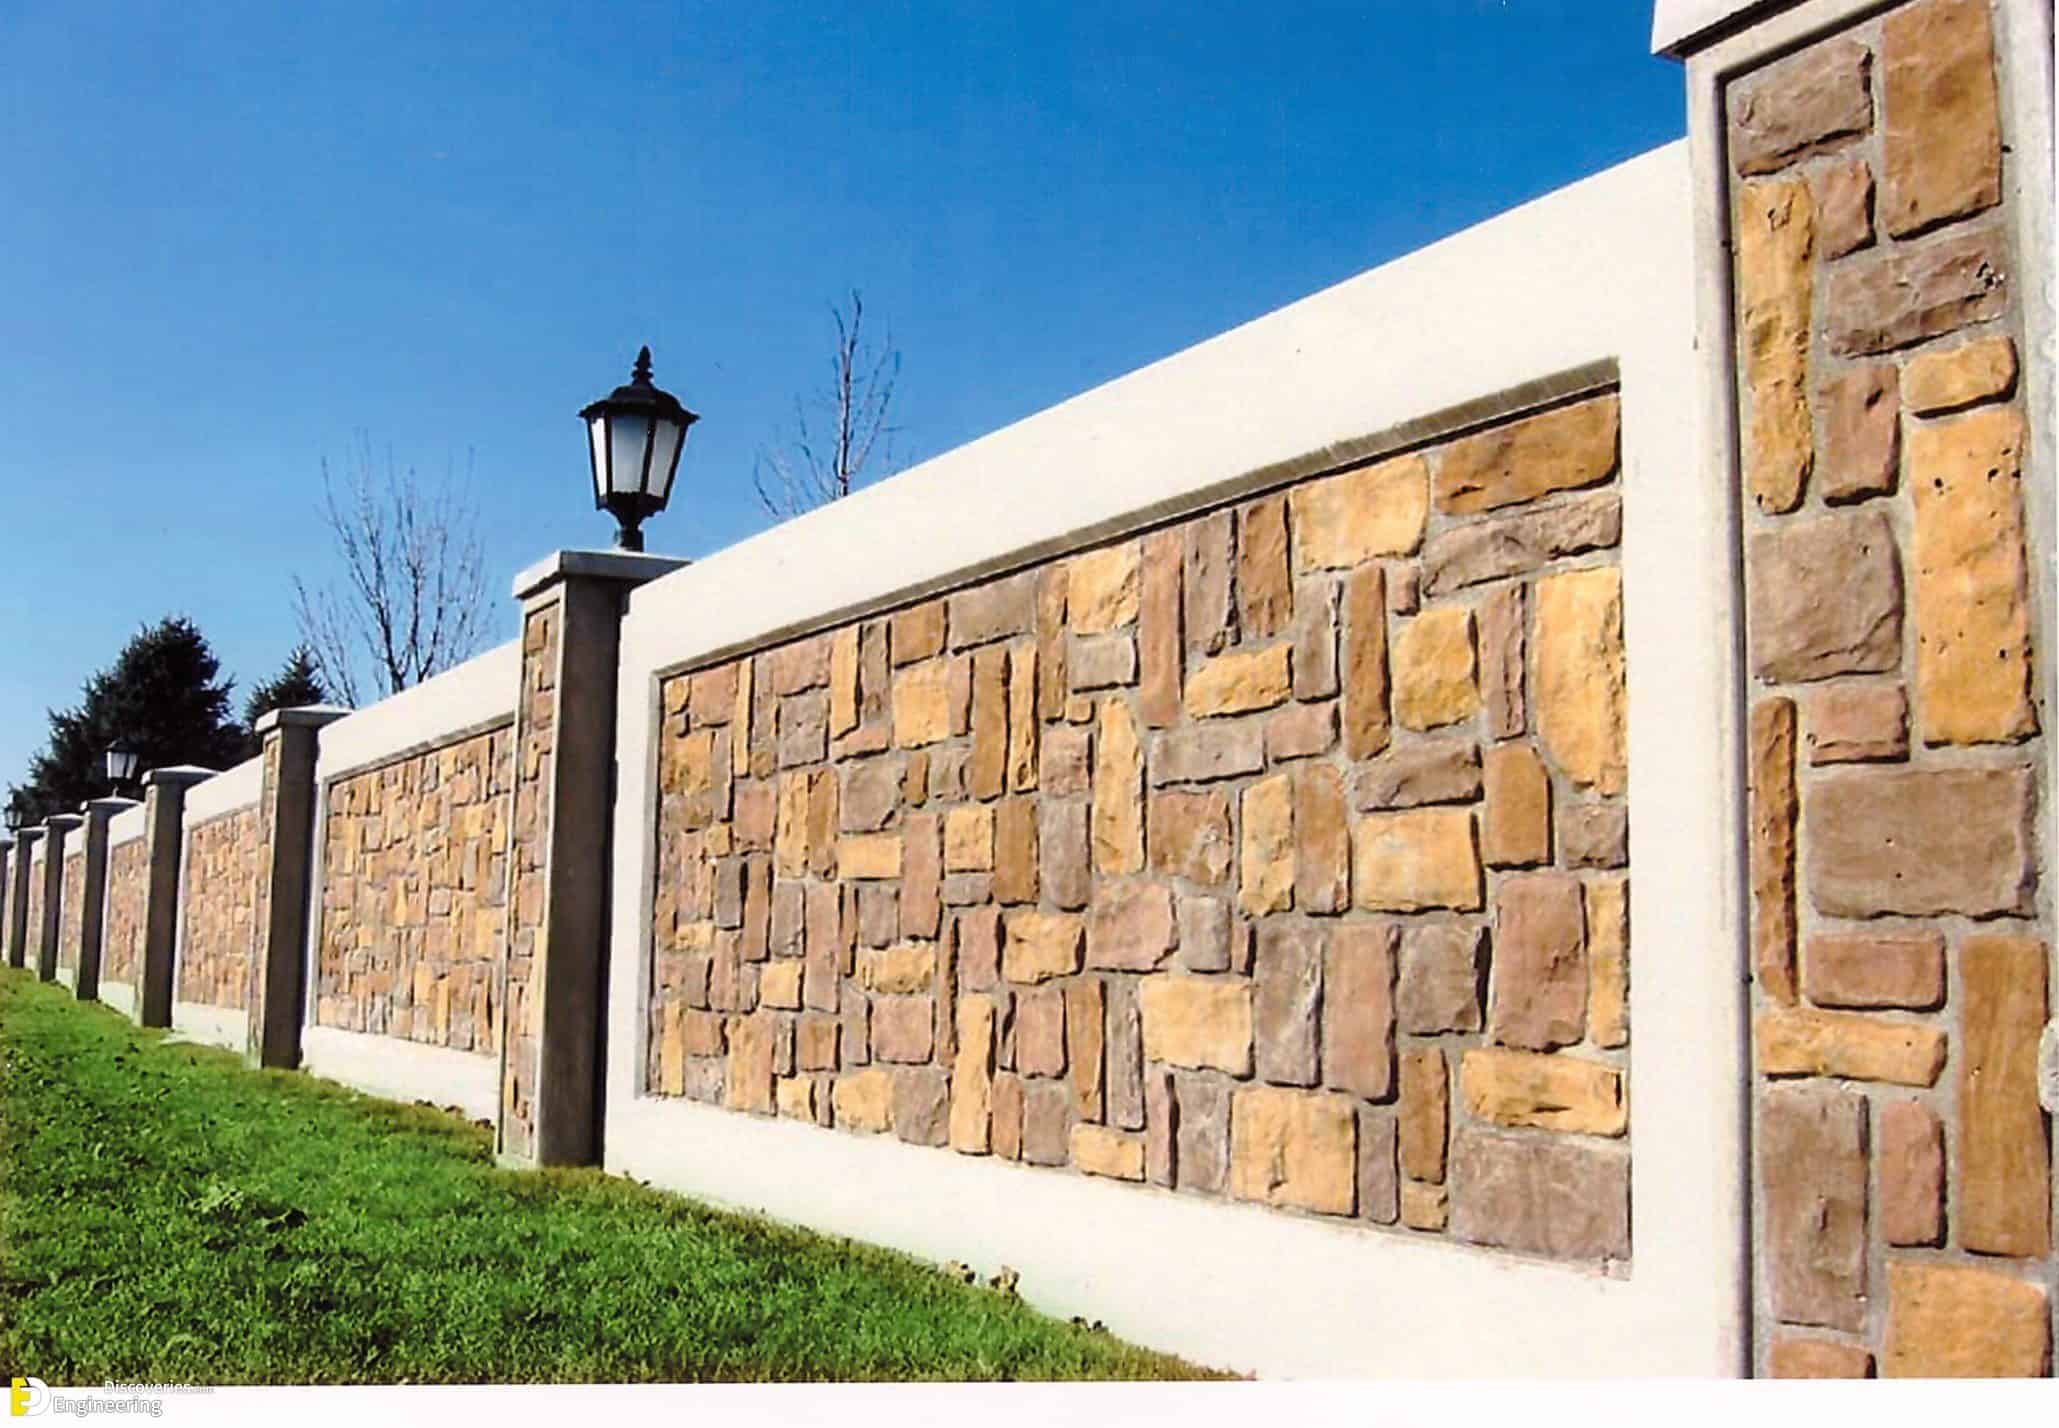 stone cladding used gives a rustic and an earthy effect to the decor of the boundary